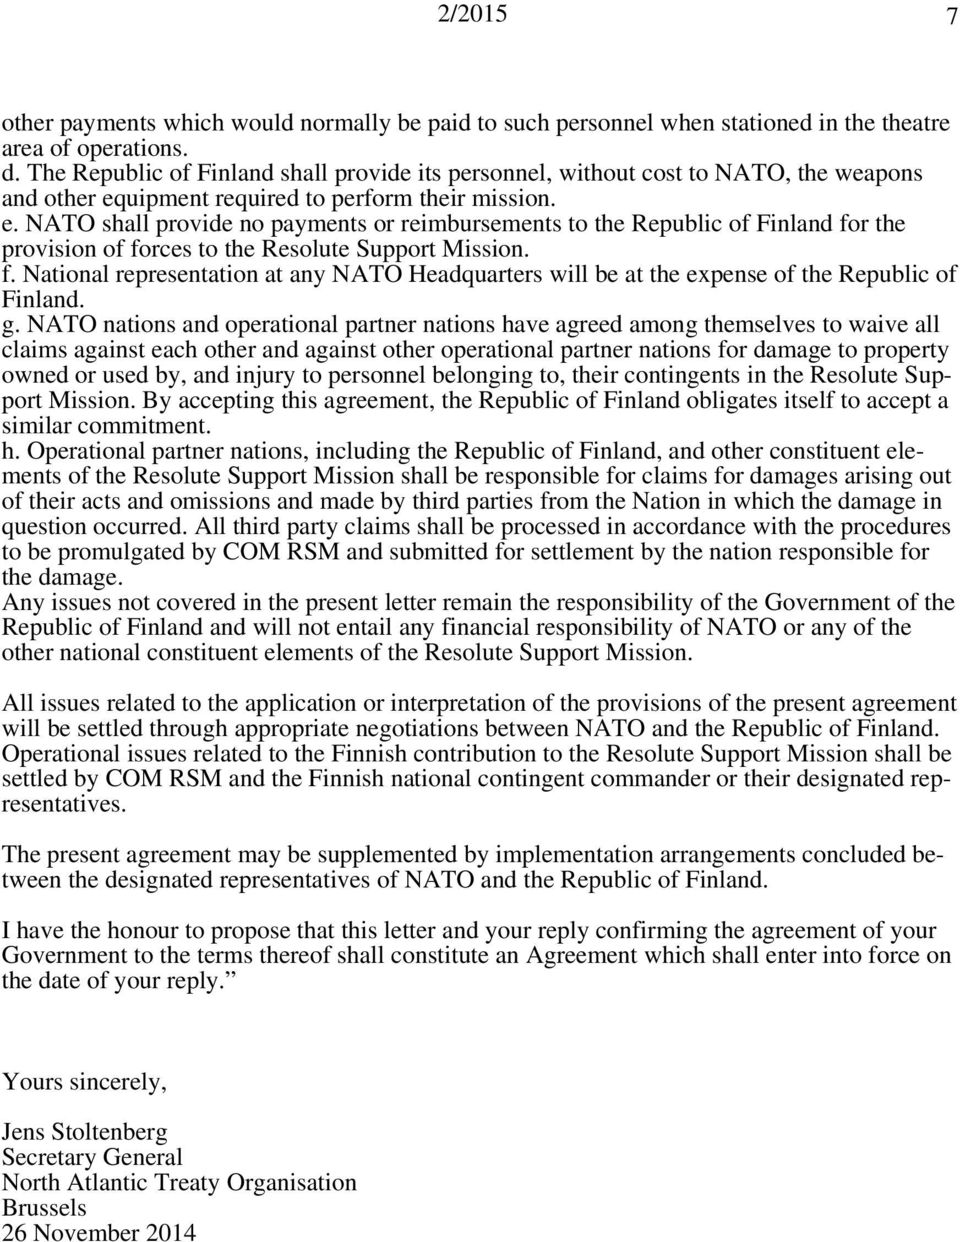 uipment required to perform their mission. e. NATO shall provide no payments or reimbursements to the Republic of Finland fo